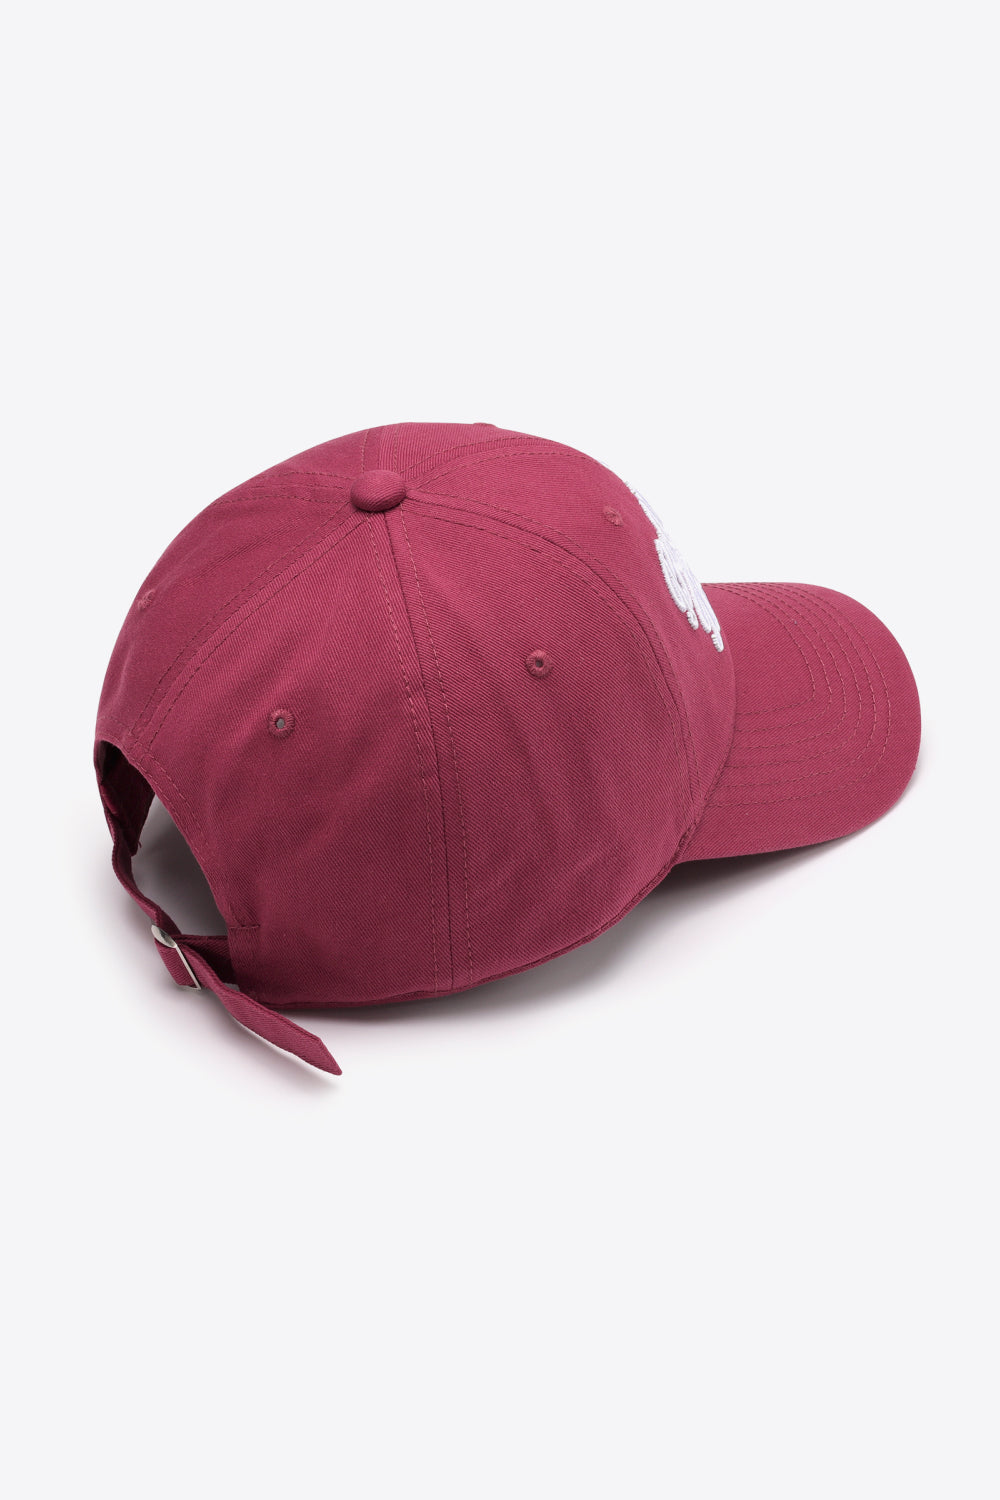 Embroidered Graphic Adjustable Baseball Cap